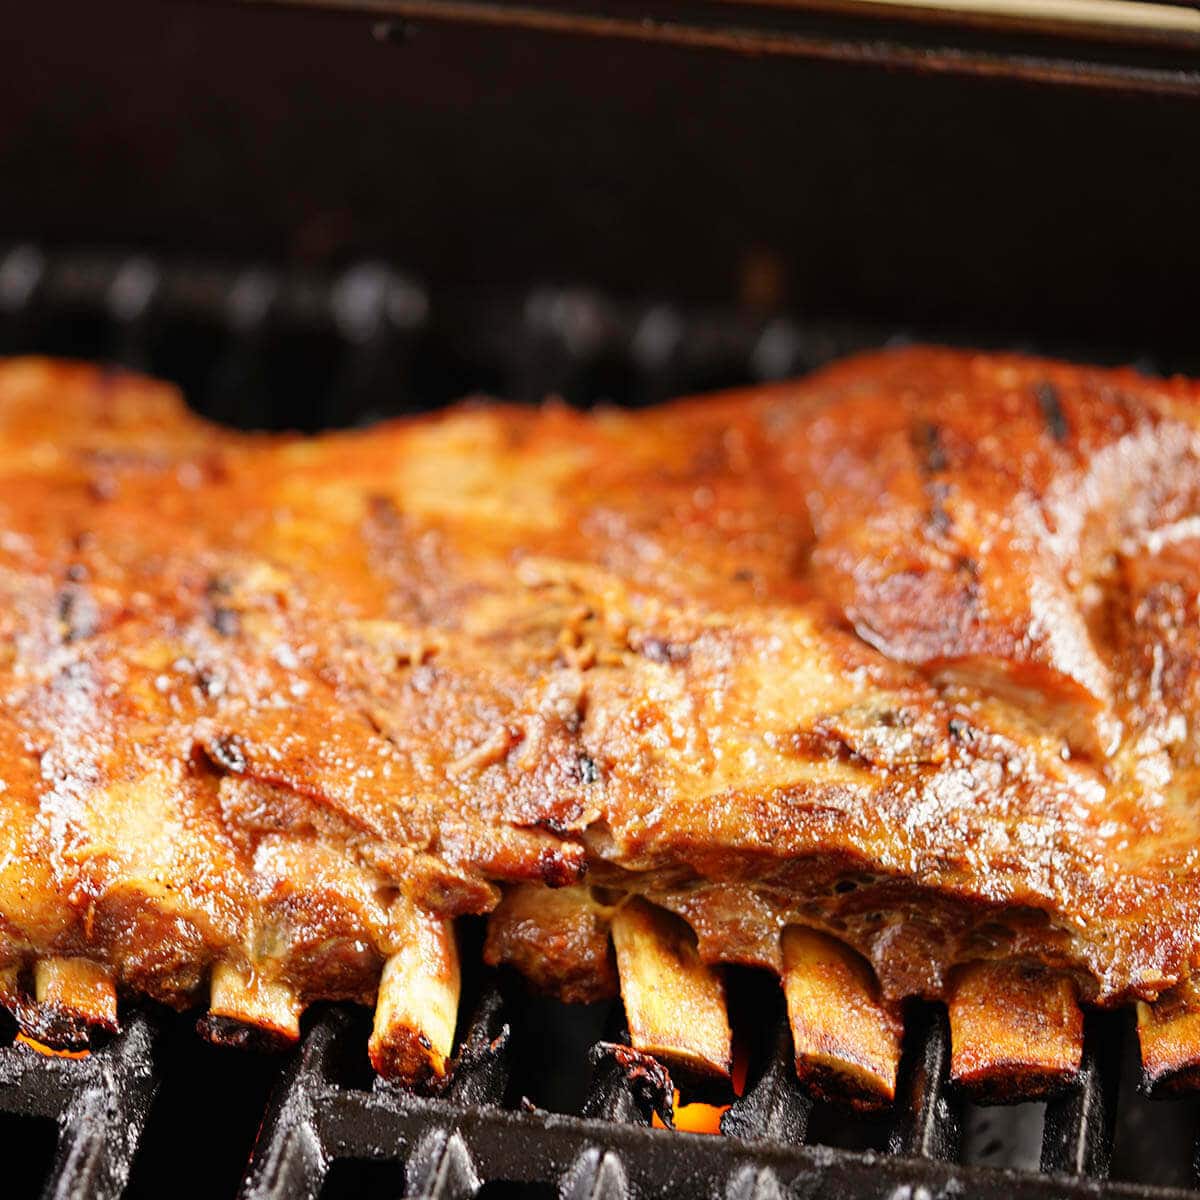 How To Make Ribs On The Grill Bowl Me Over,Marscapone Benjamin Moore Mascarpone